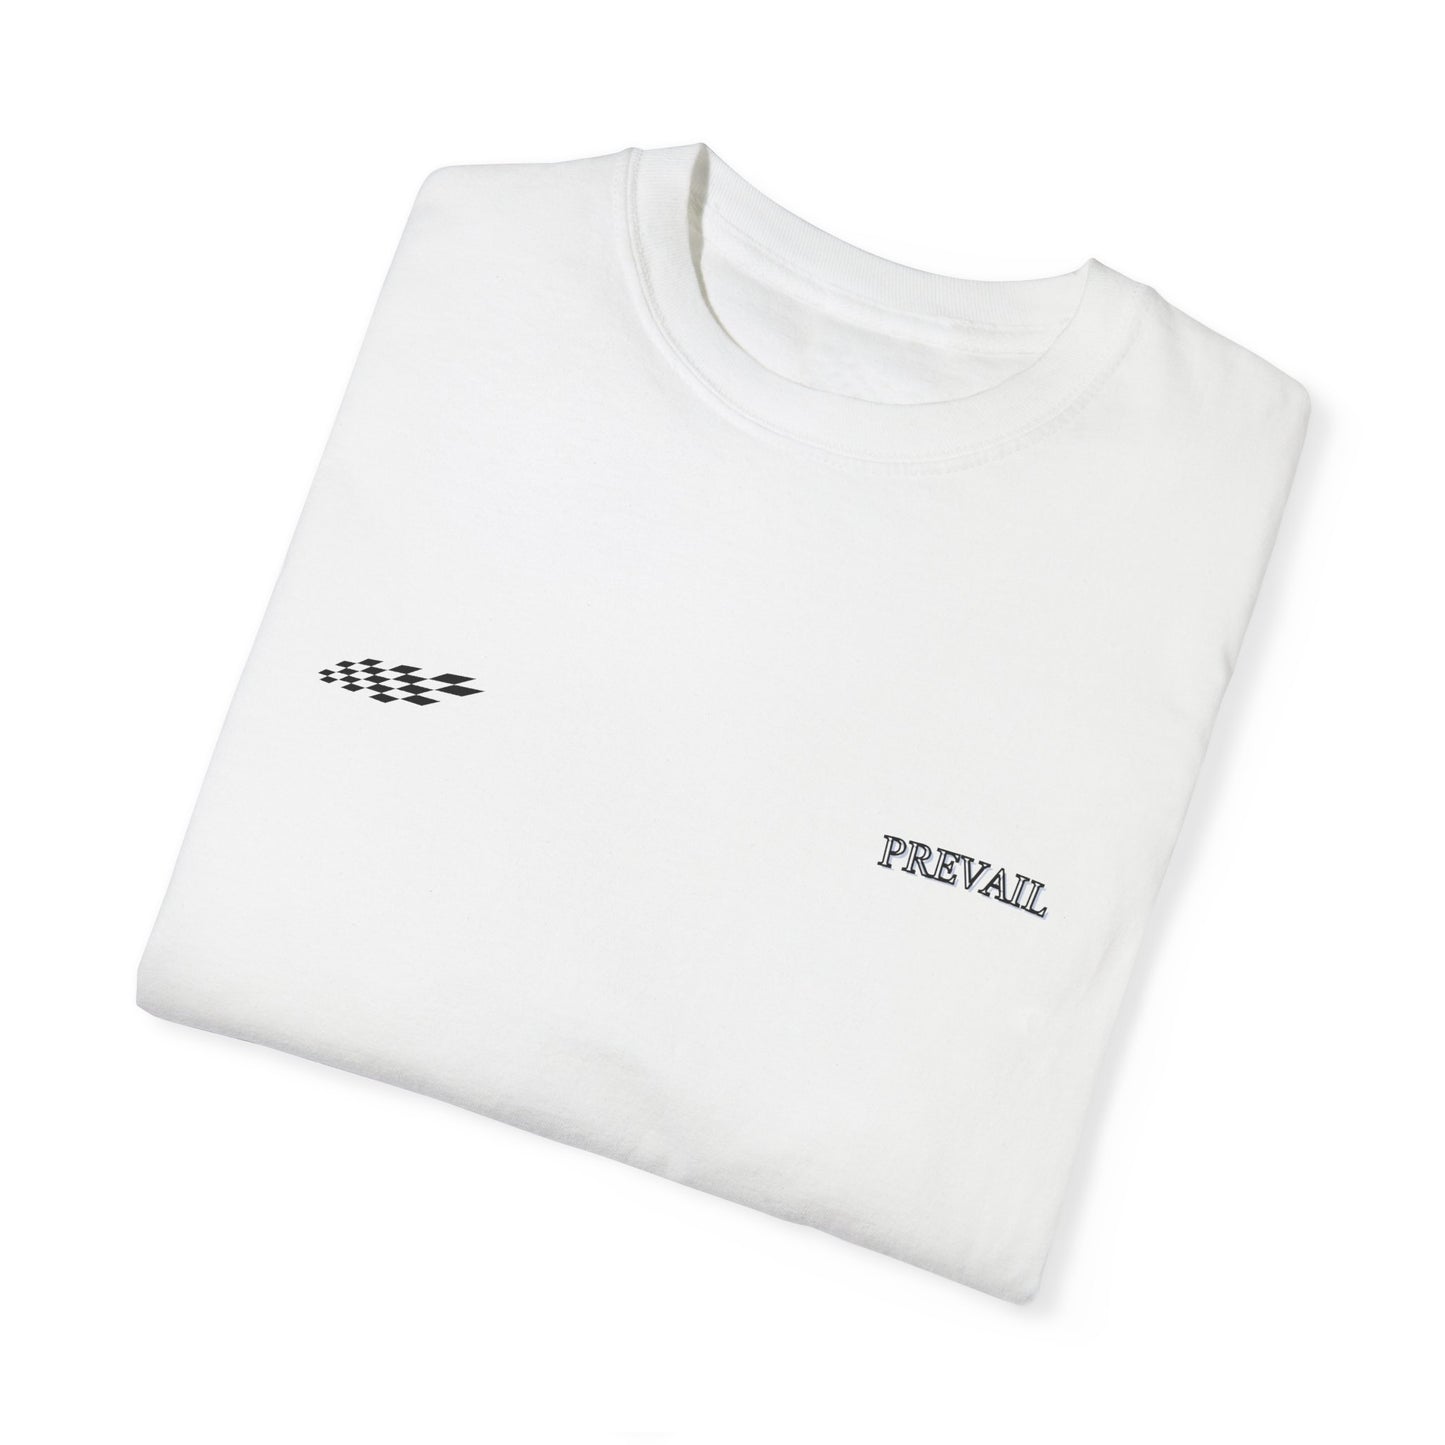 PREVAIL "Record Setters" T-SHIRT